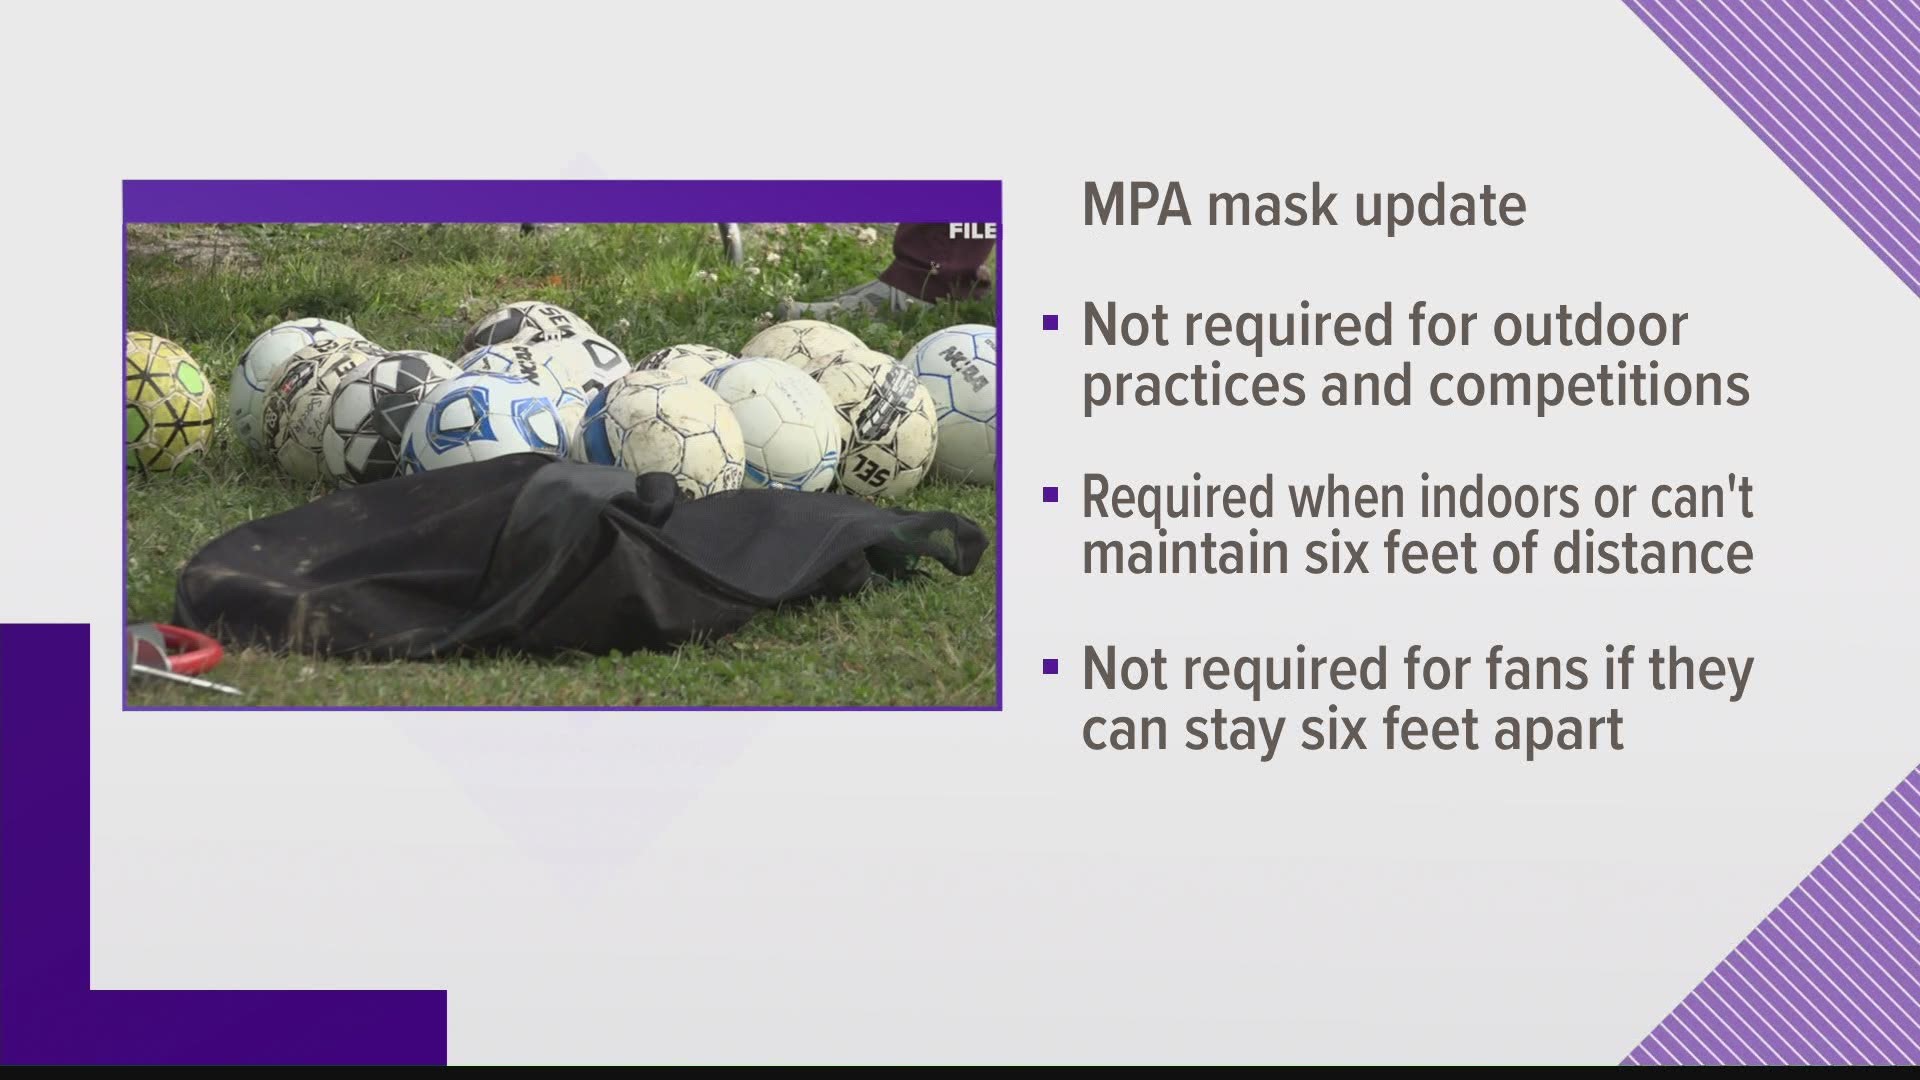 Masks are still mandatory in some situations, like when on the bench or when going indoors.